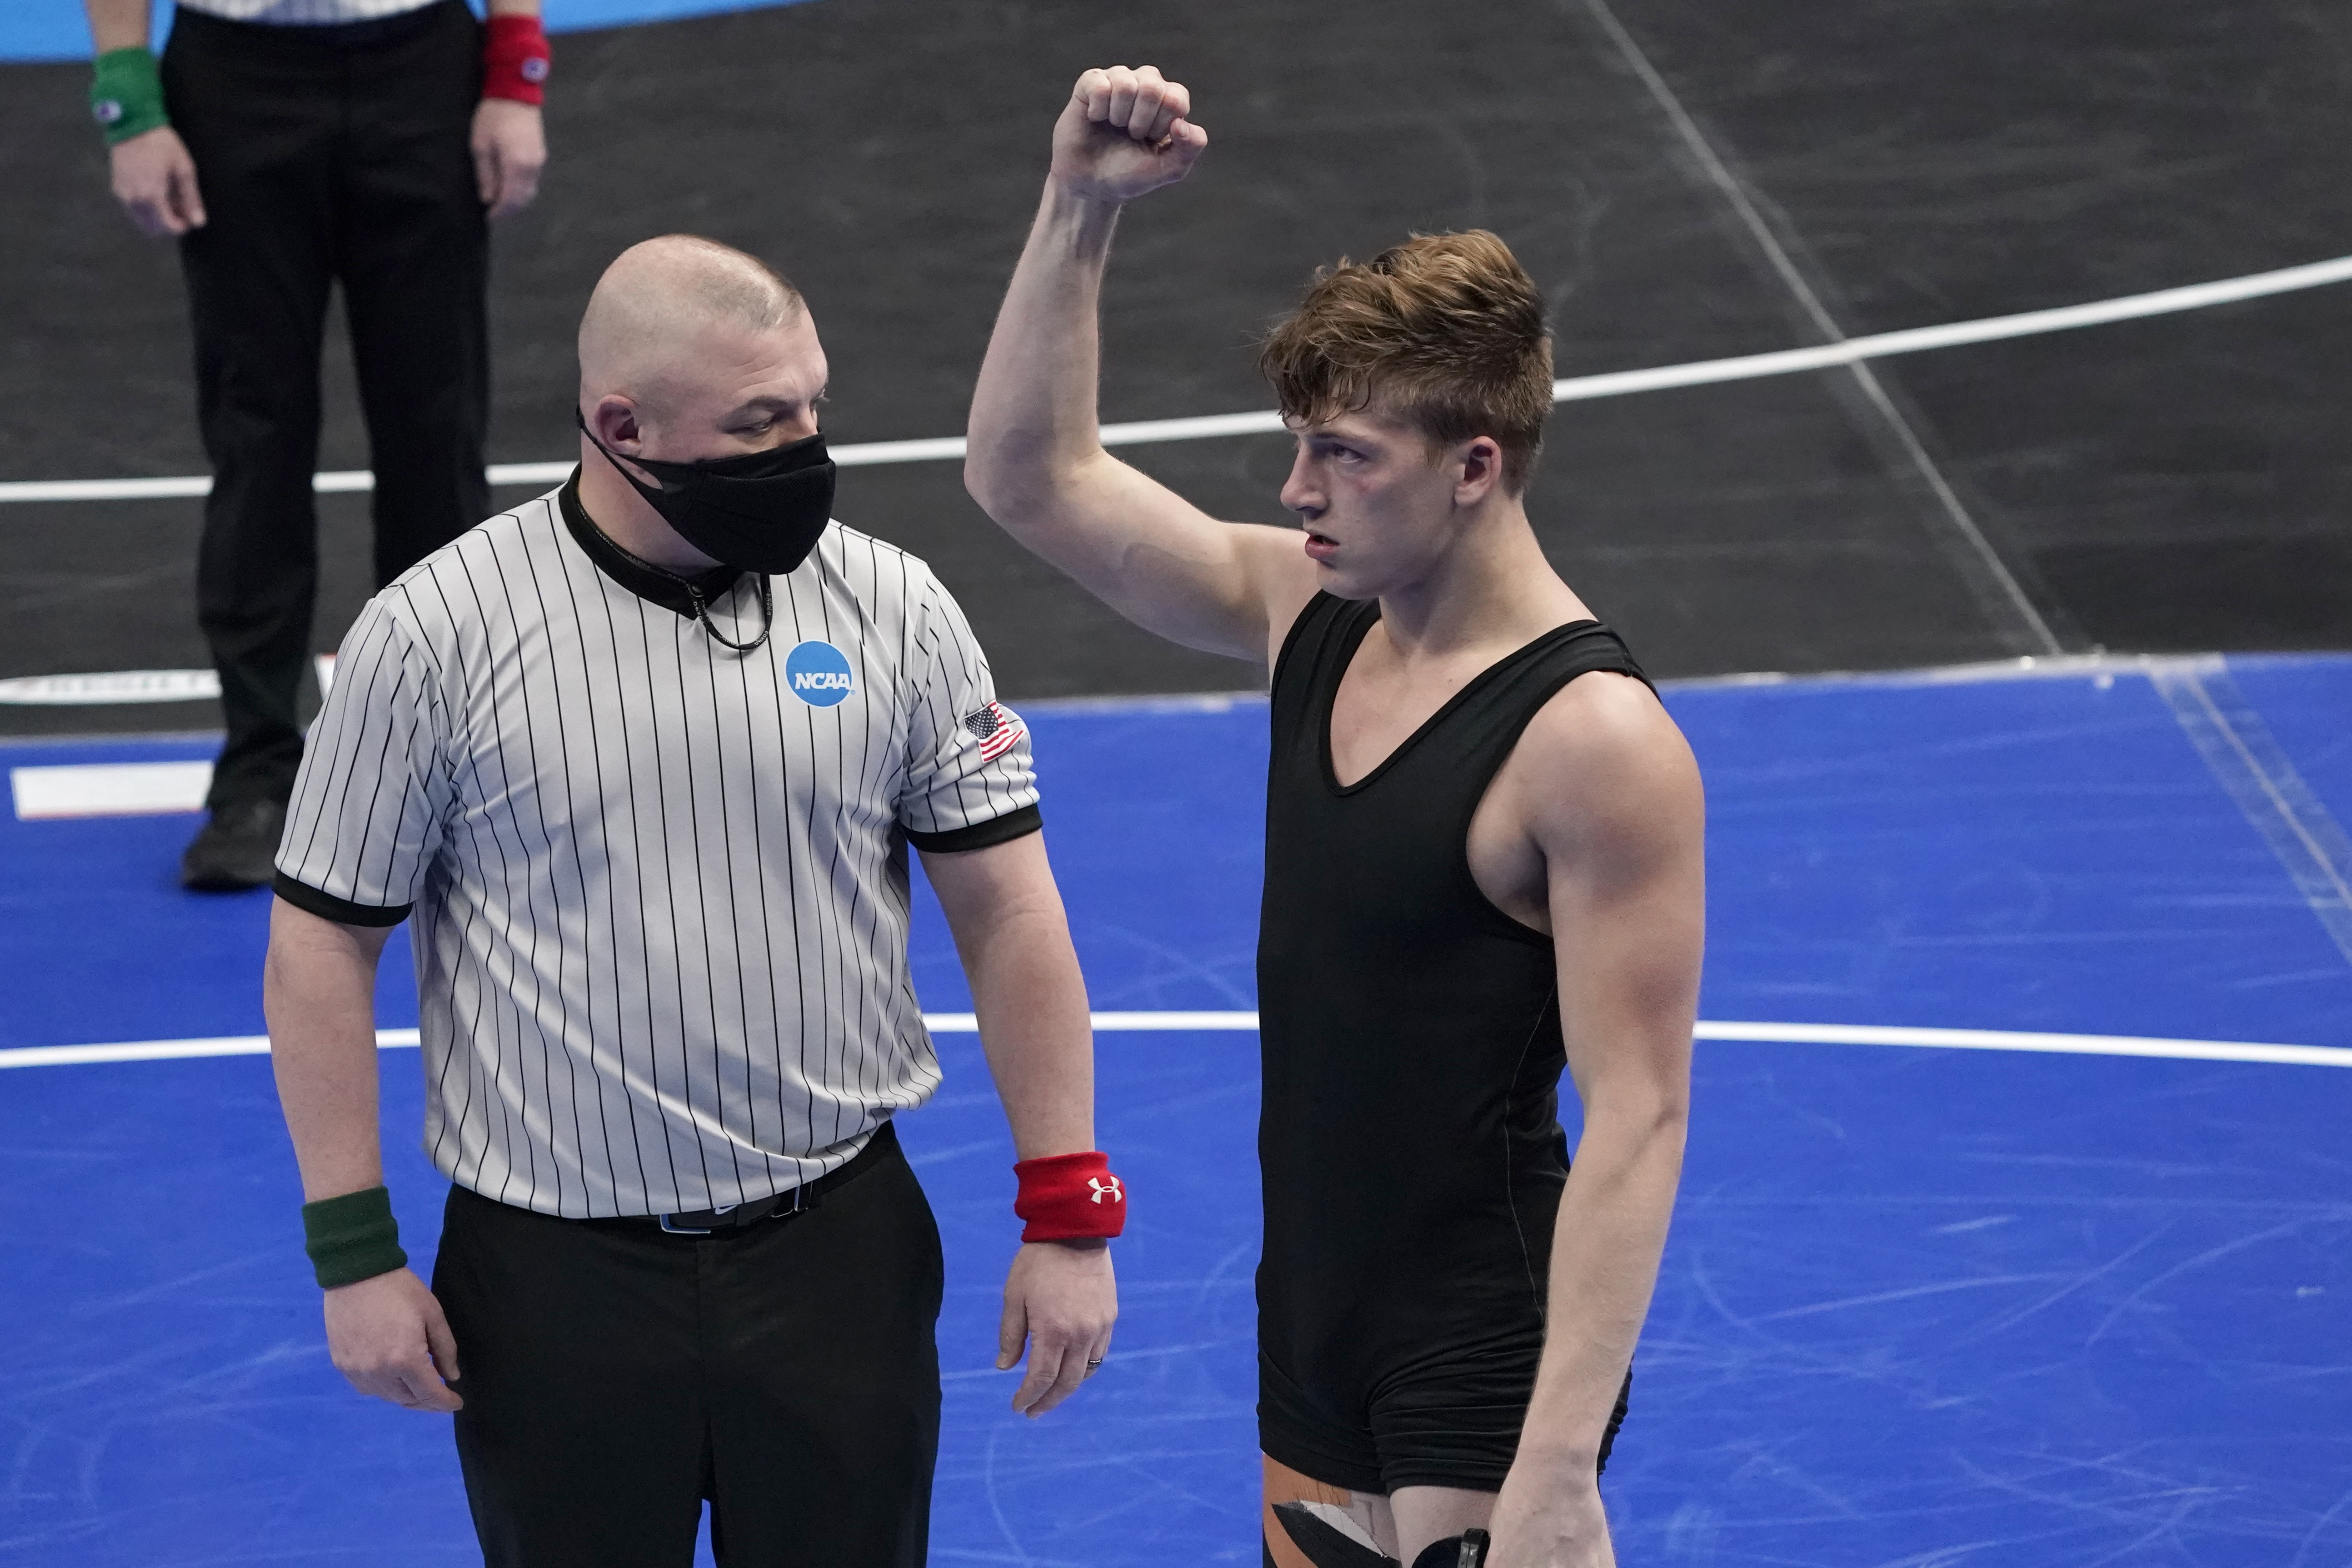 How to LIVE STREAM FREE the medal rounds of the NCAA Wrestling Championships Saturday (3-20-21)